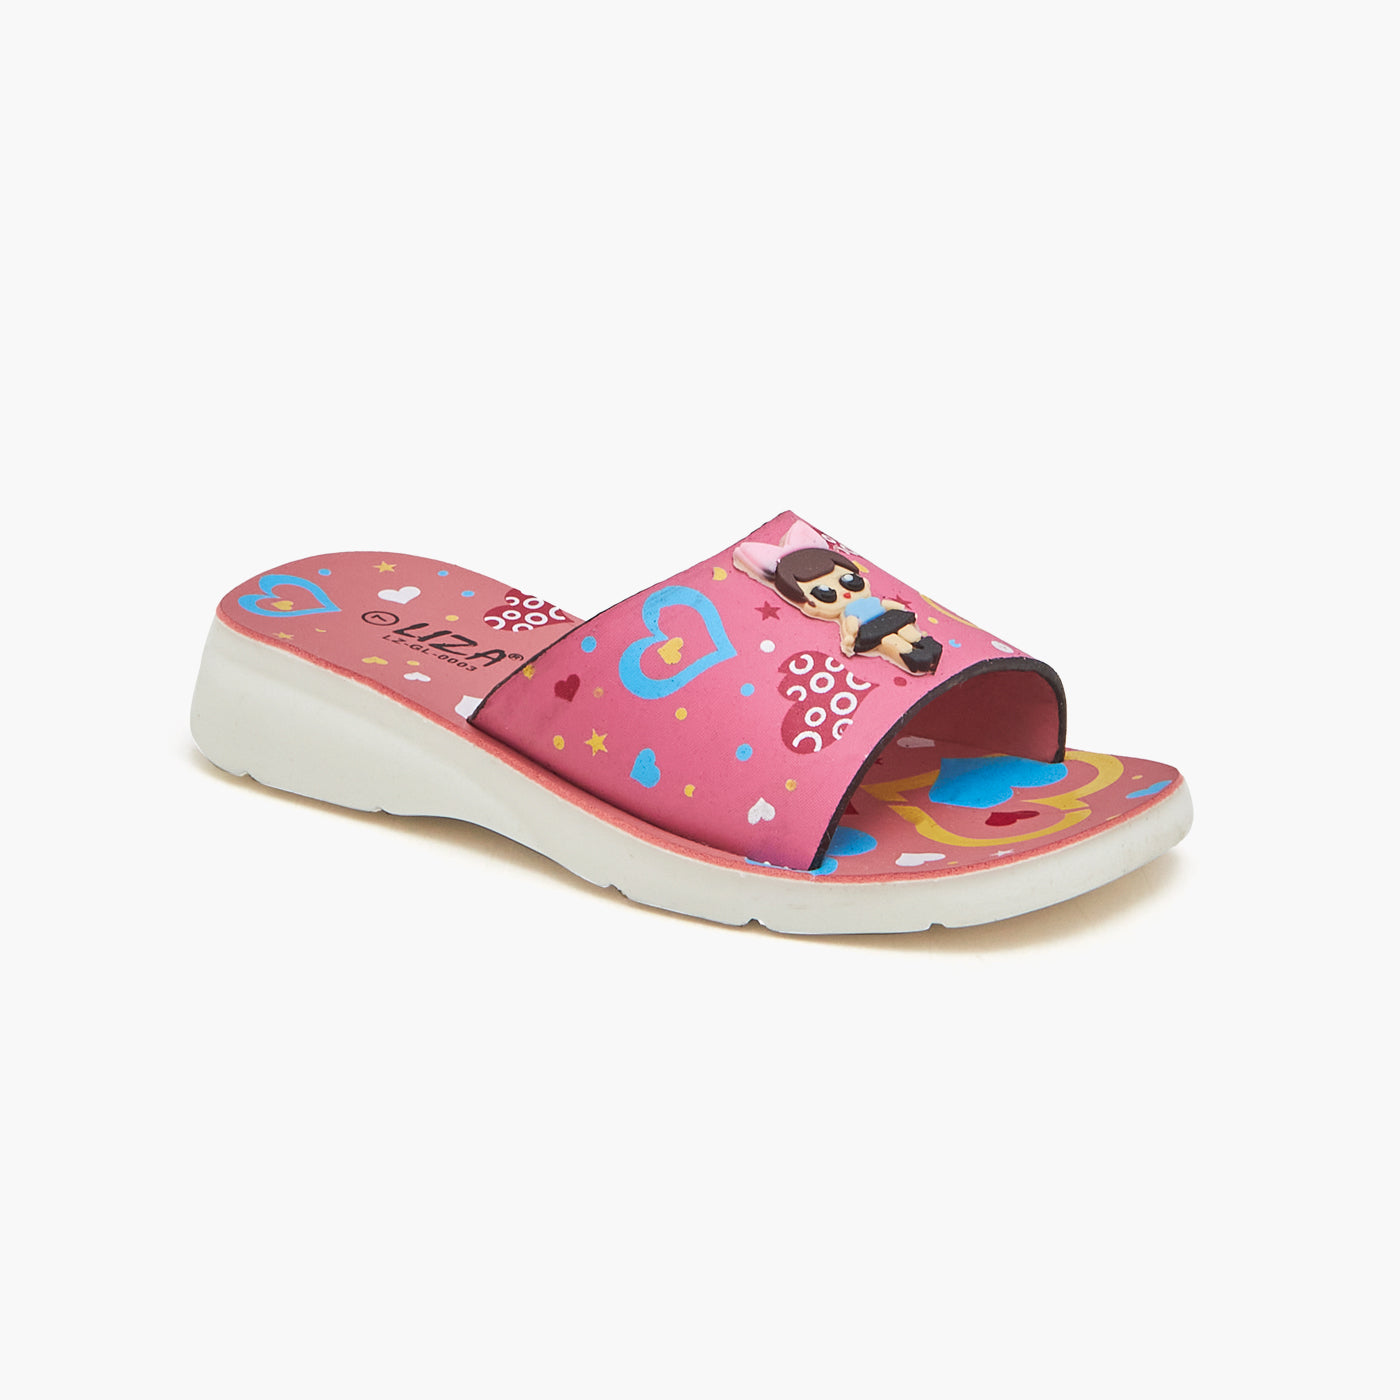 Buy Piclite Home use Slipper for women | Daily use Hawai slipper chappal  girls | Ladies Hawai slipper pack of 1 Multicolor at Amazon.in